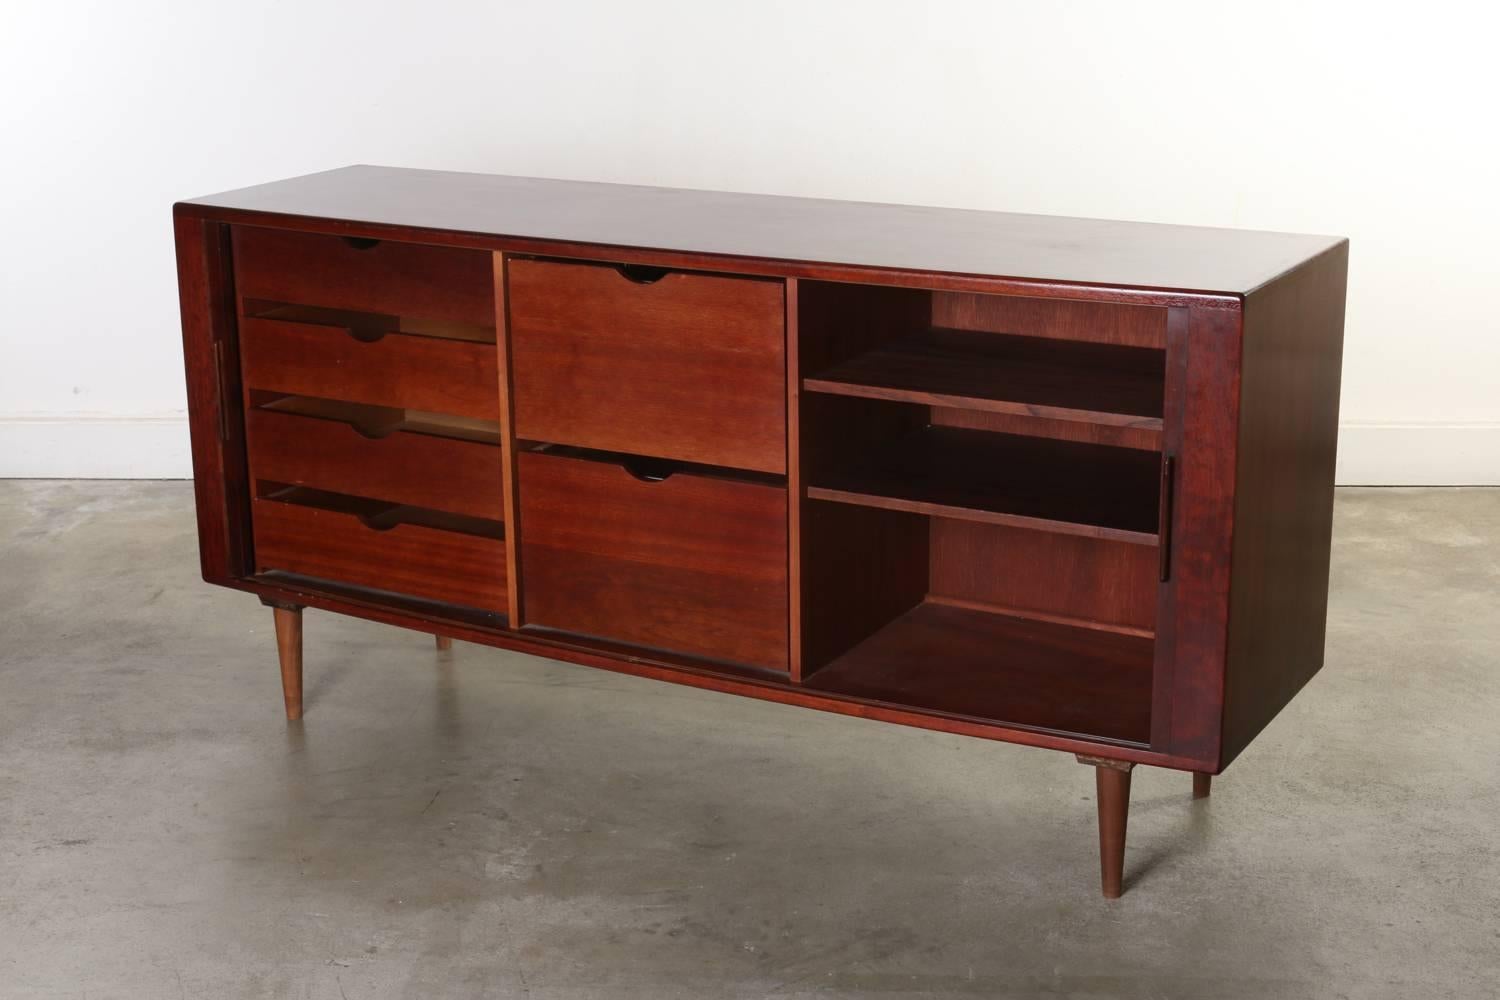 Mid-20th Century Rosewood Credenza Cabinet with Tambour Doors Made in Denmark by H. P. Hansen